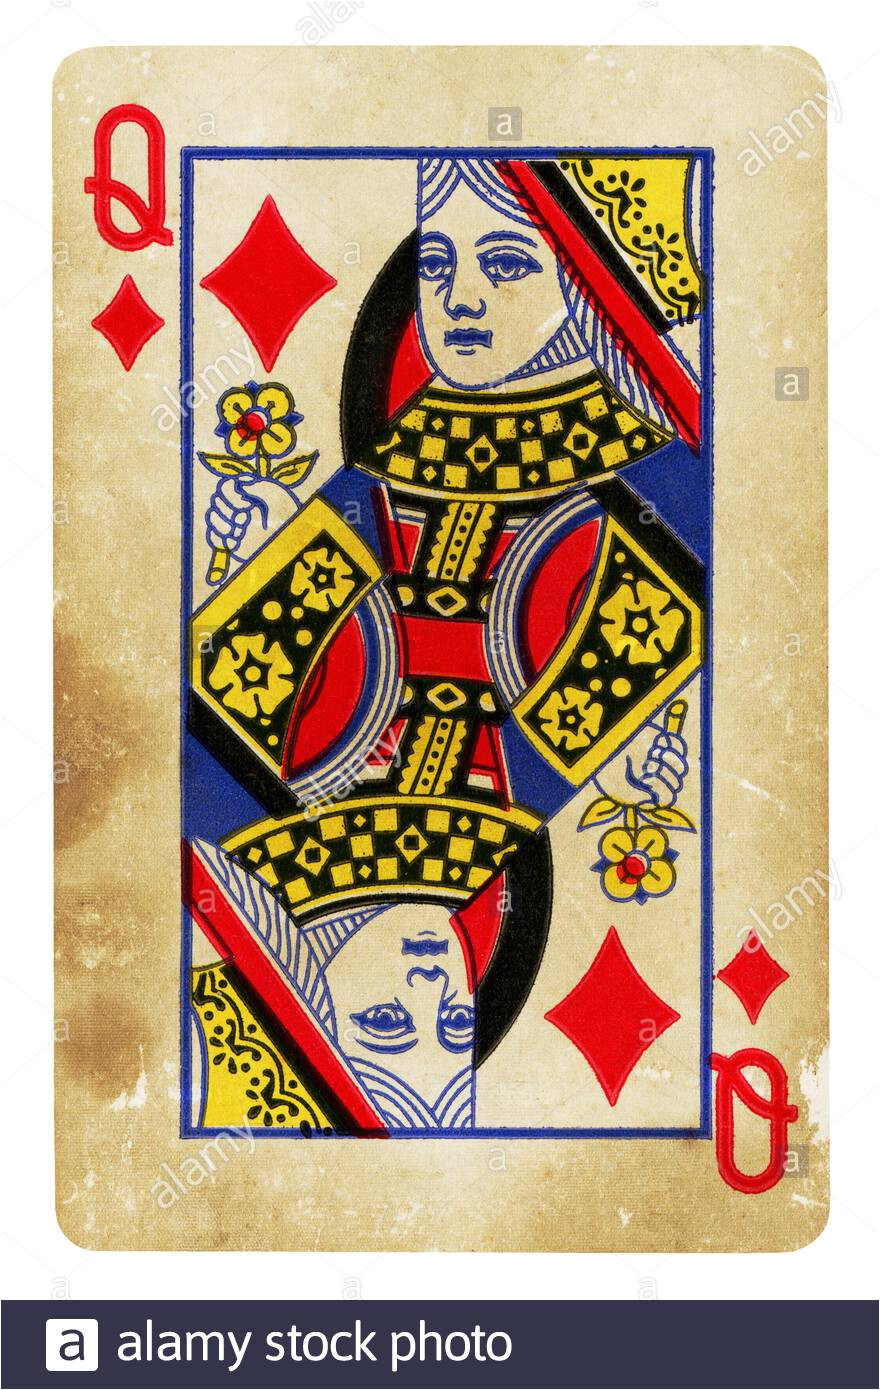 queen of diamonds vintage playing card isolated on white clipping path included 2b6wjfk jpg